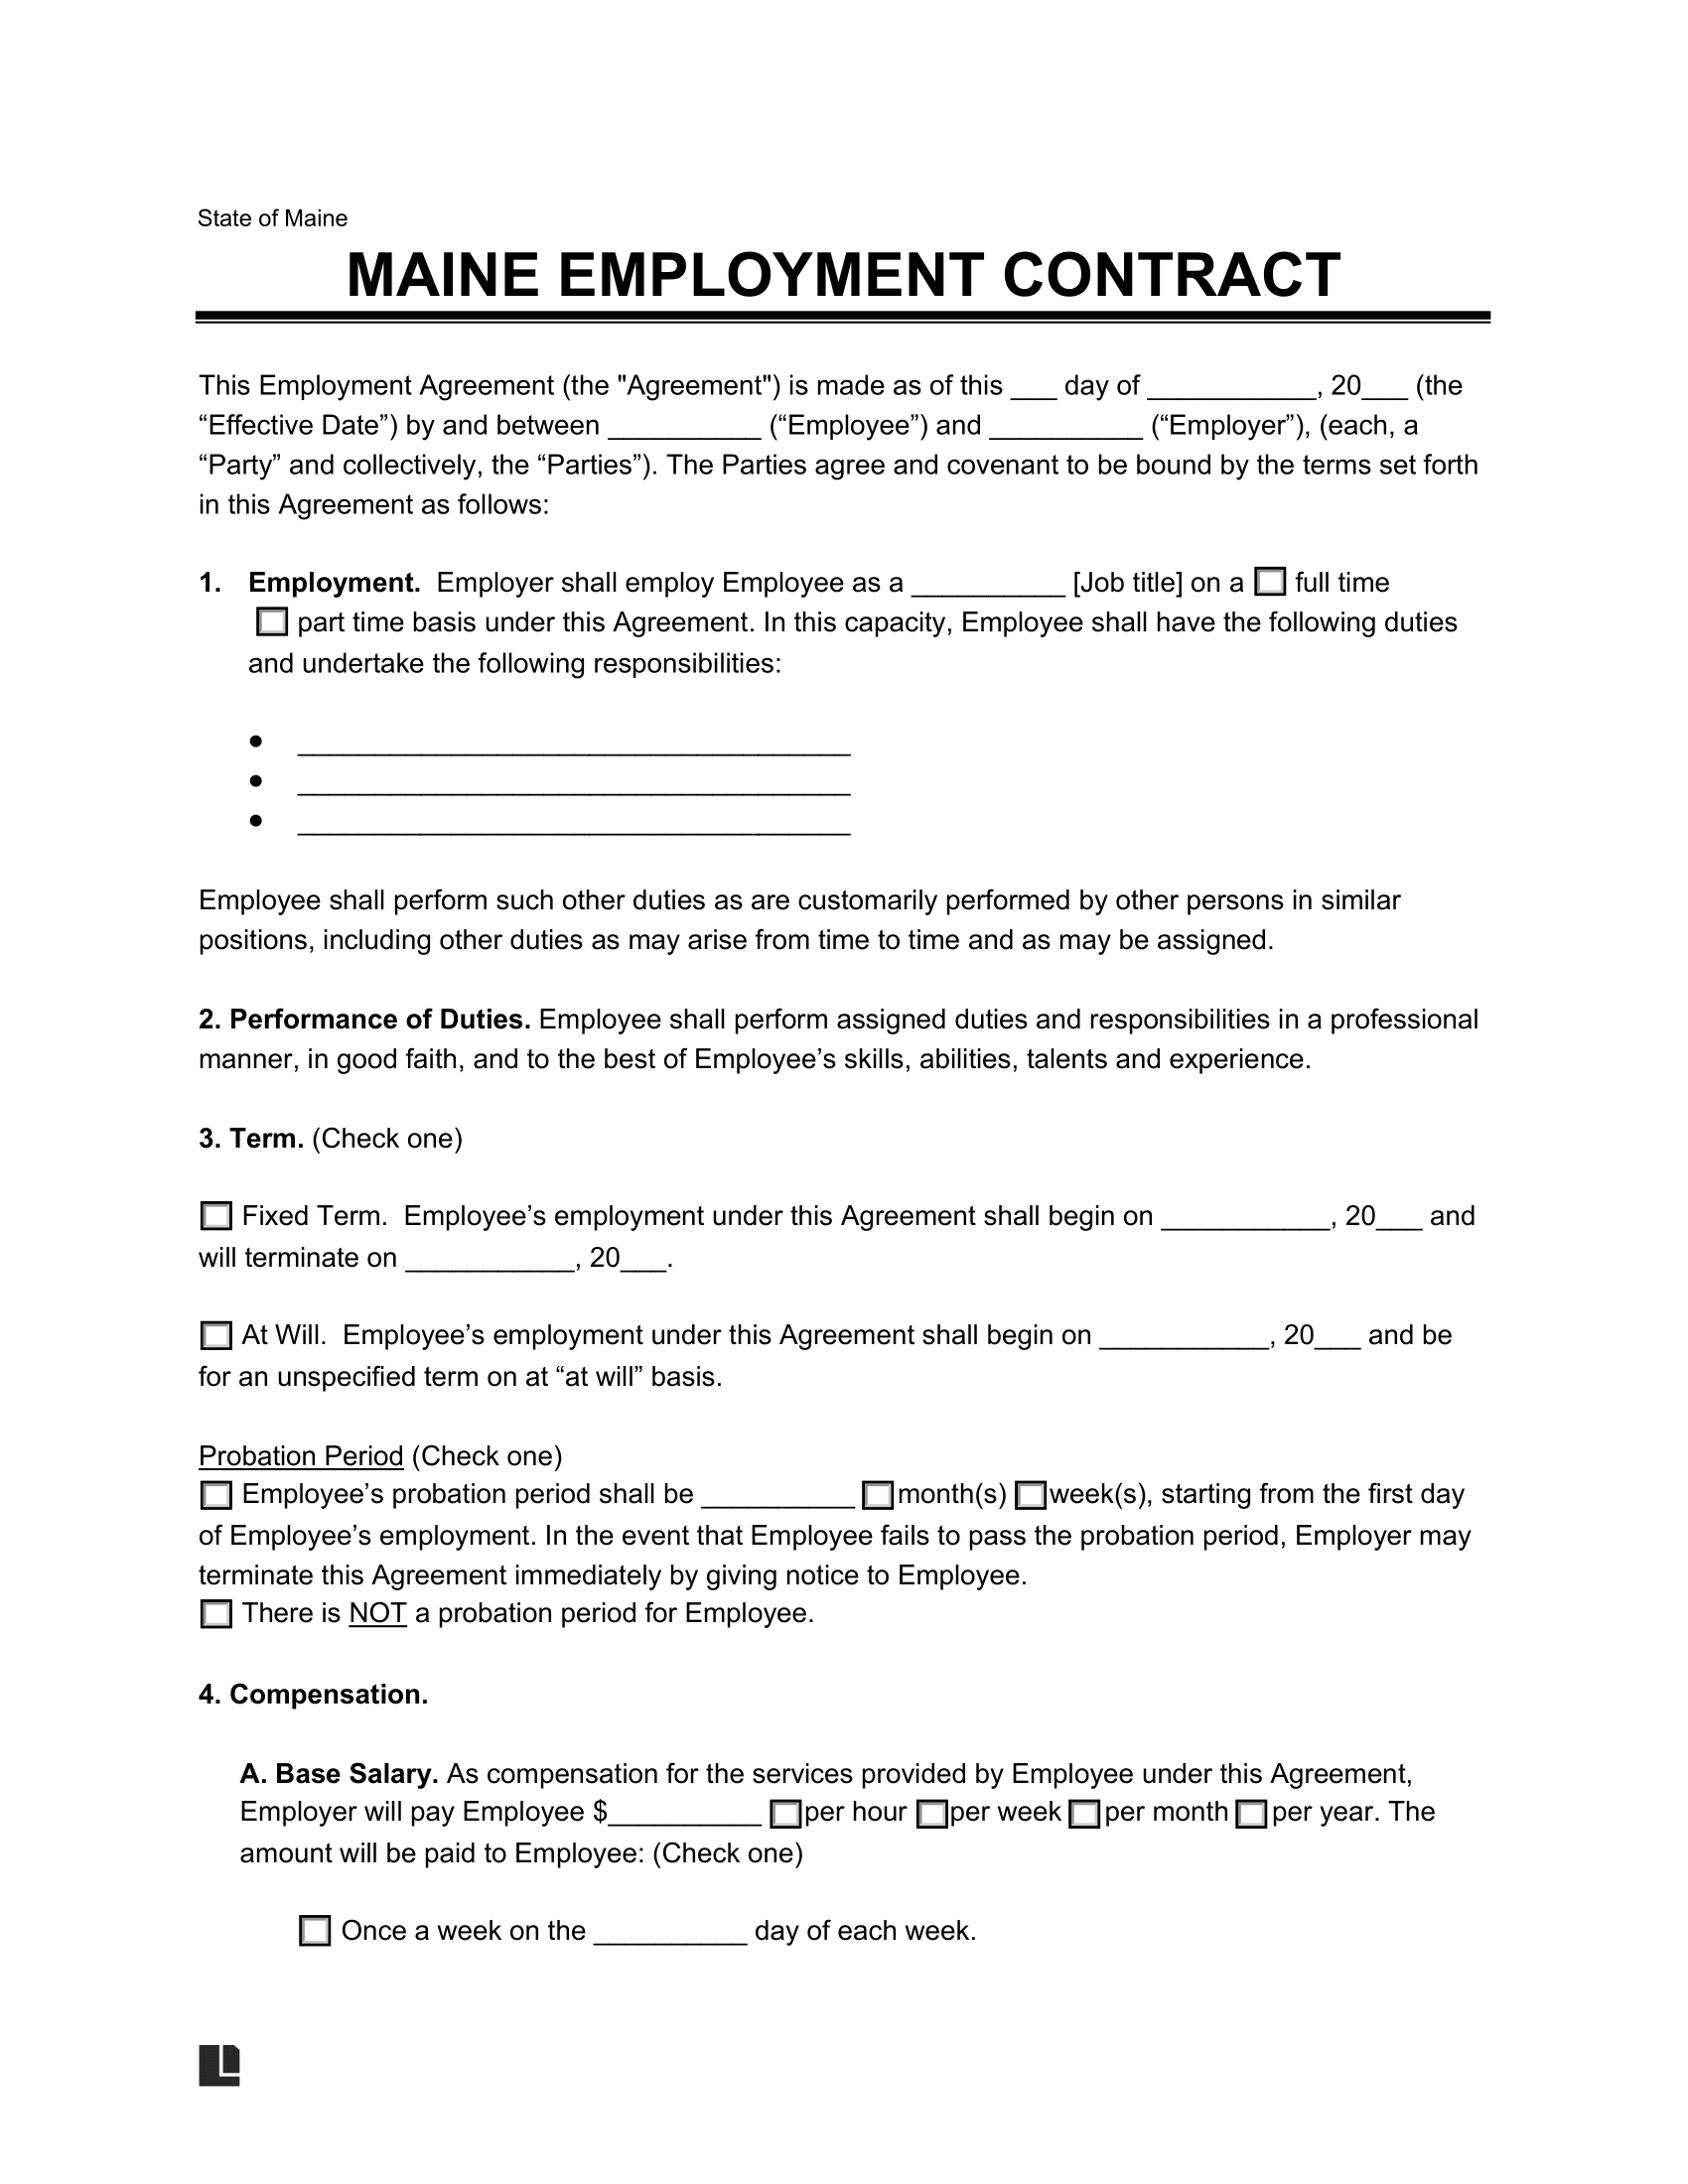 maine employment contract template